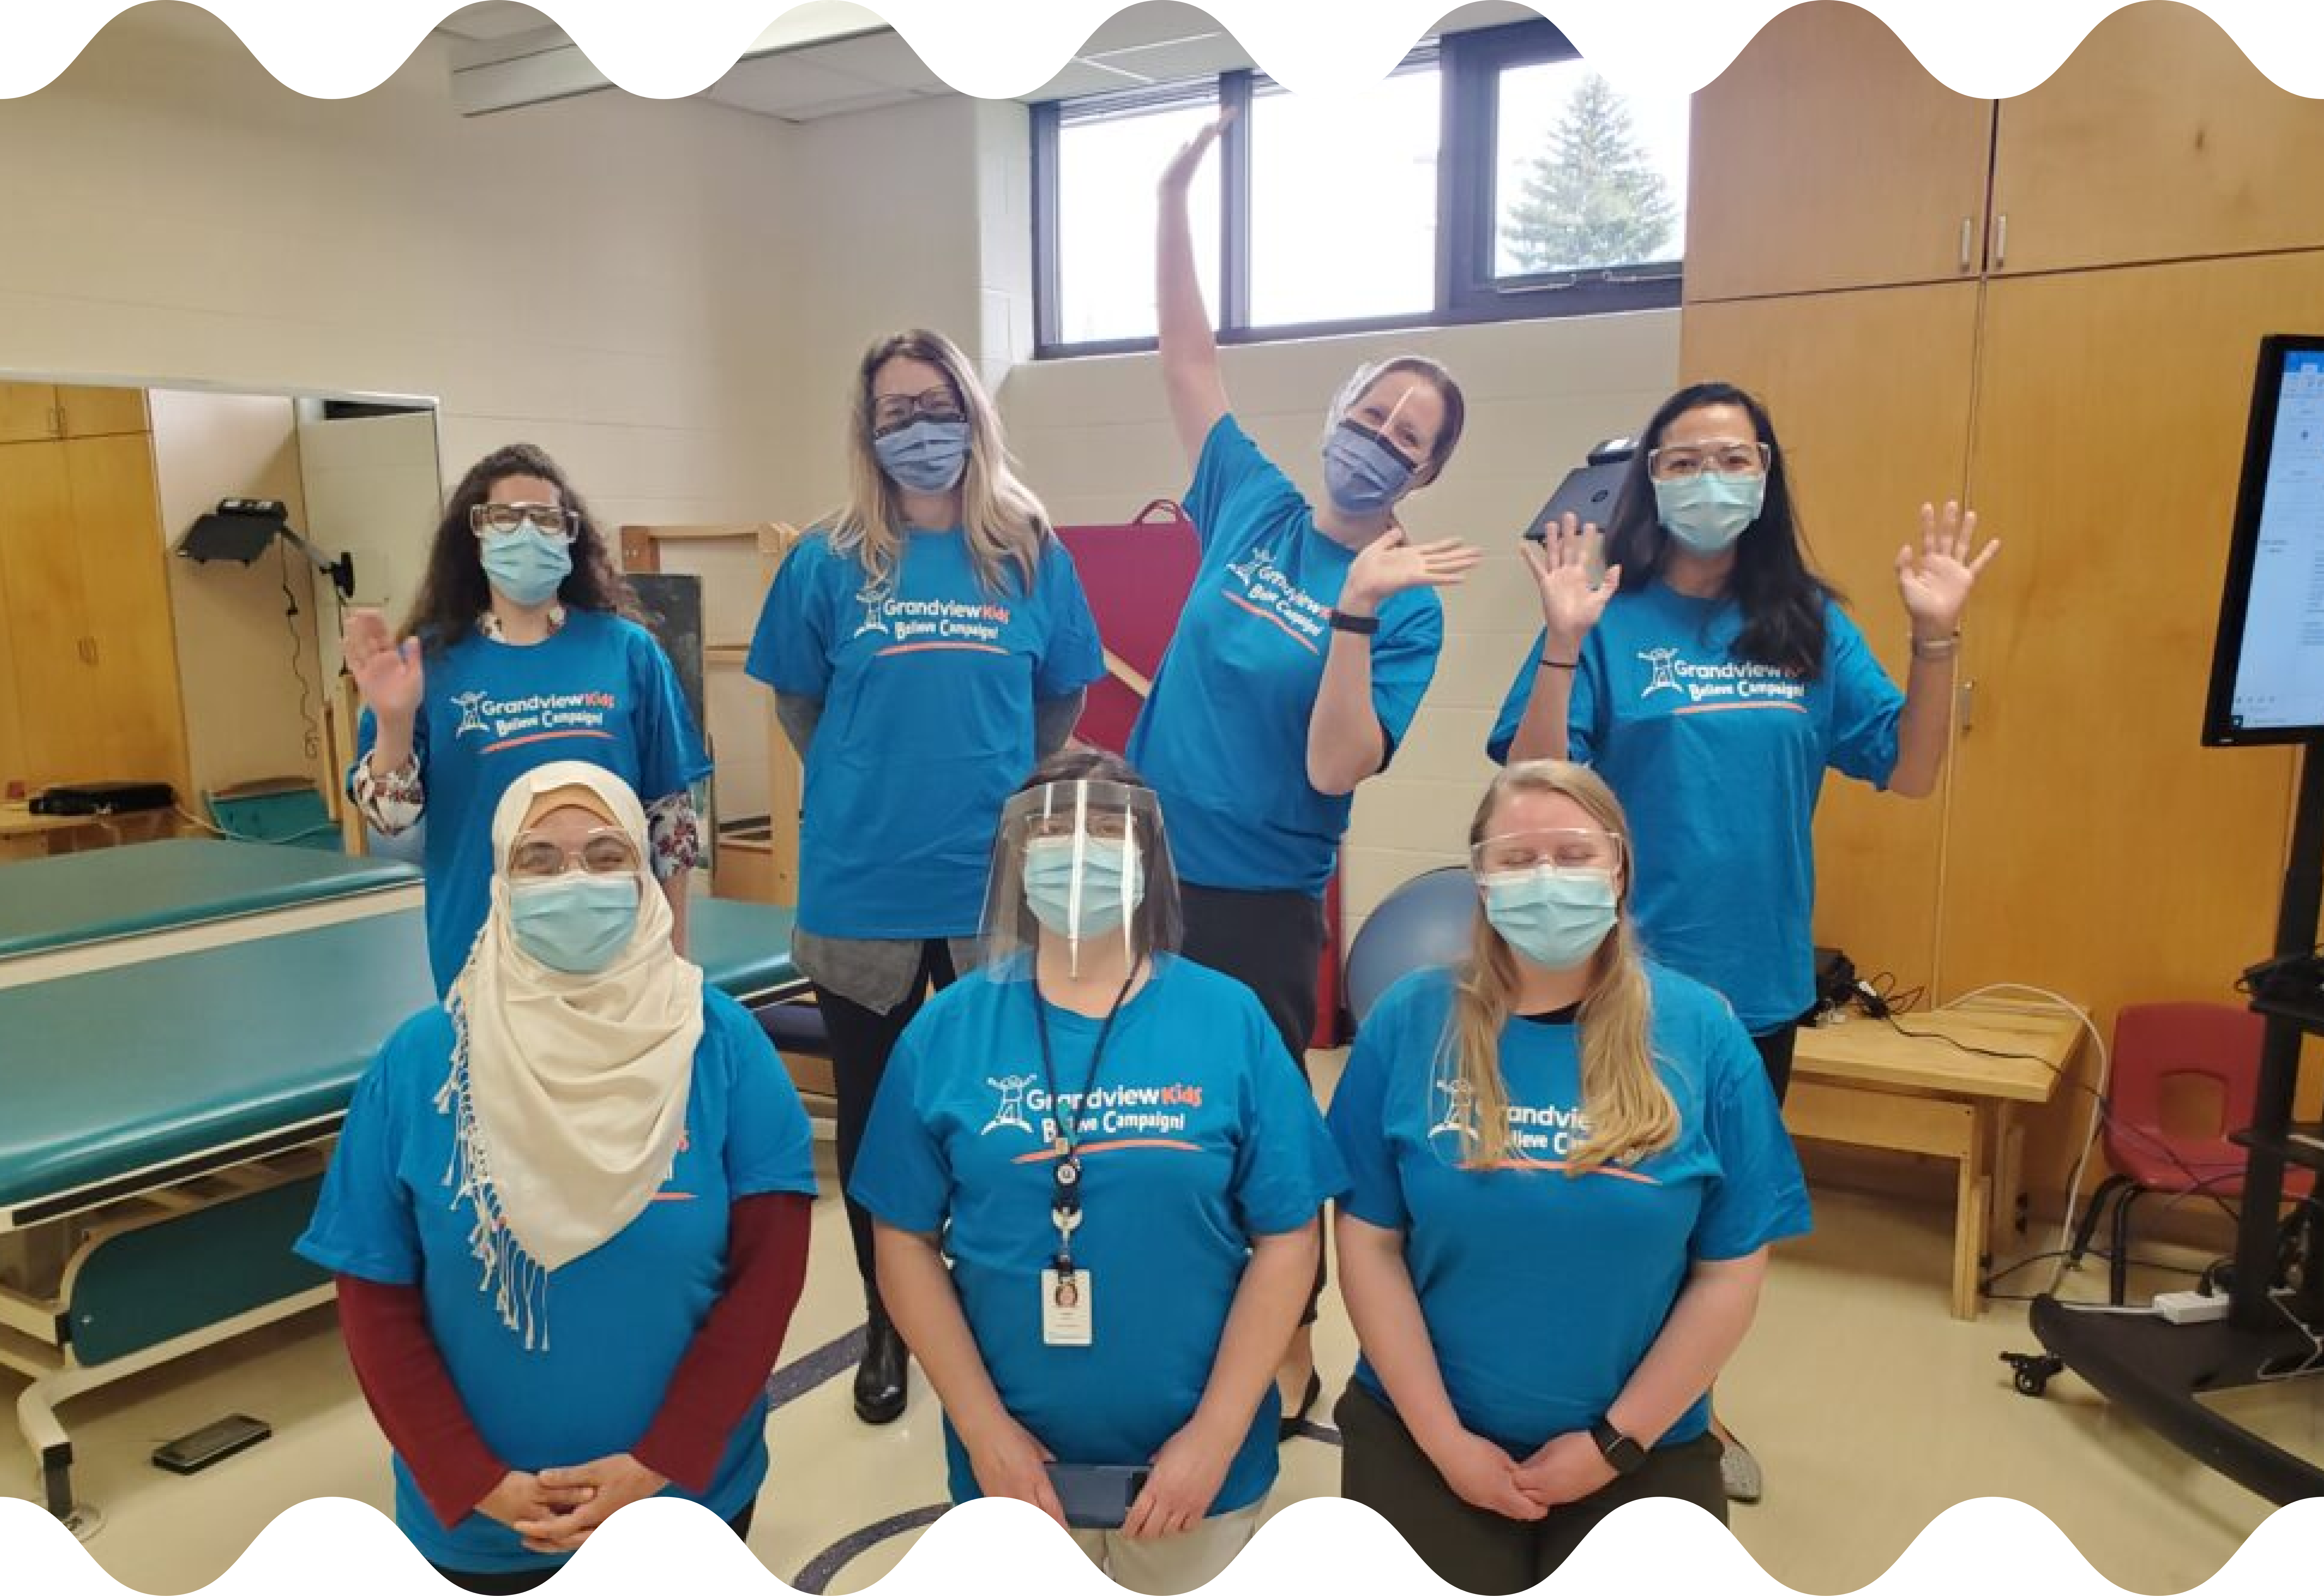 Team Grandview Members, part of the Complex Care Program, pose wearing masks and eye protection.